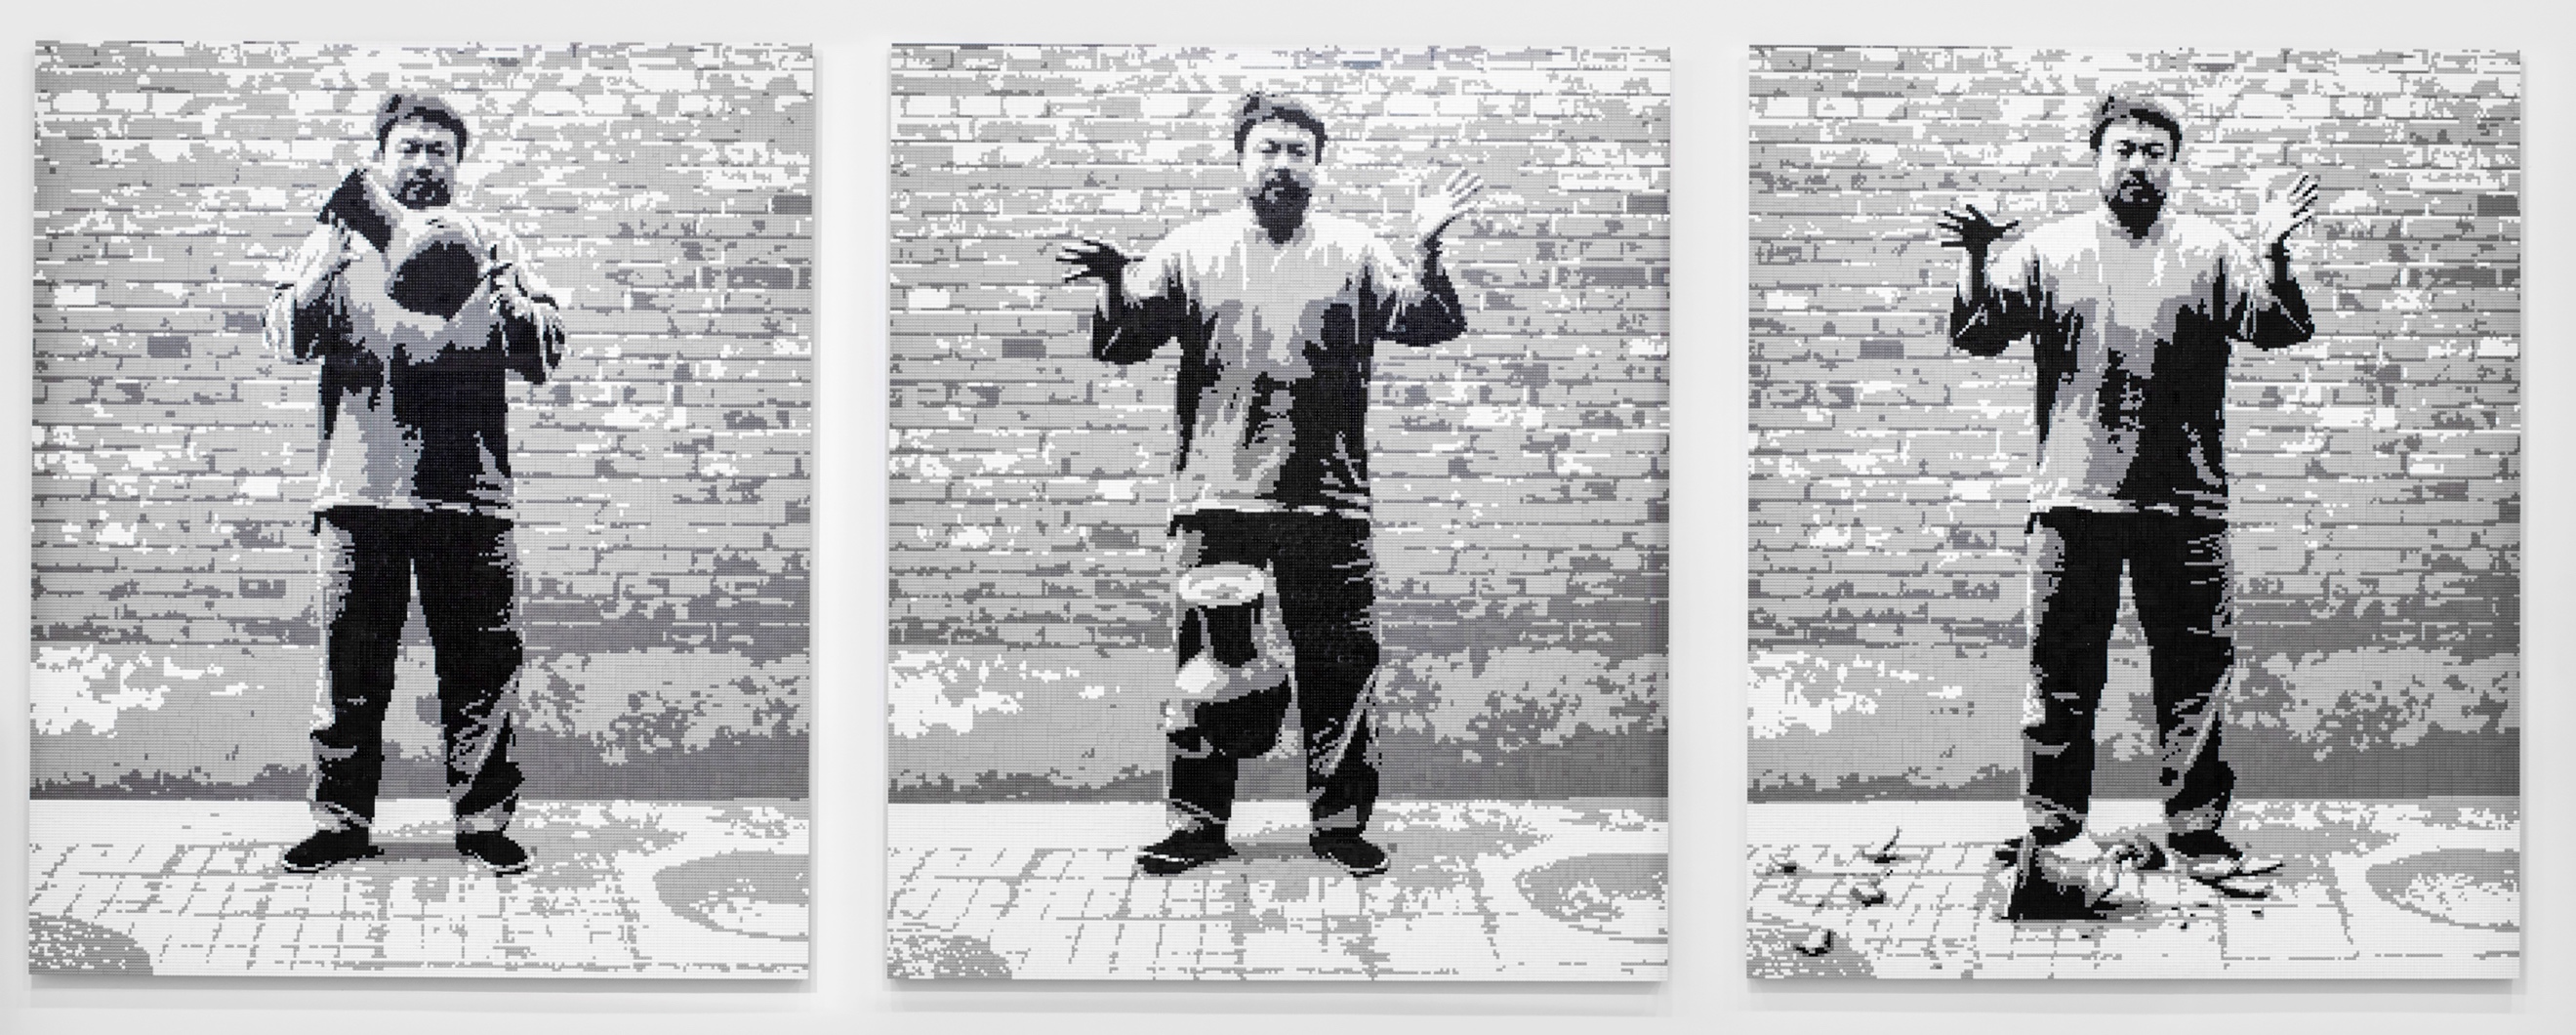 Ai Weiwei: “Dropping a Han Dynasty Urn”, 2015, LEGO bricks (from the original 1995 photographic triptych by the artist), 230x192x3cm. Courtesy Lisson Gallery.